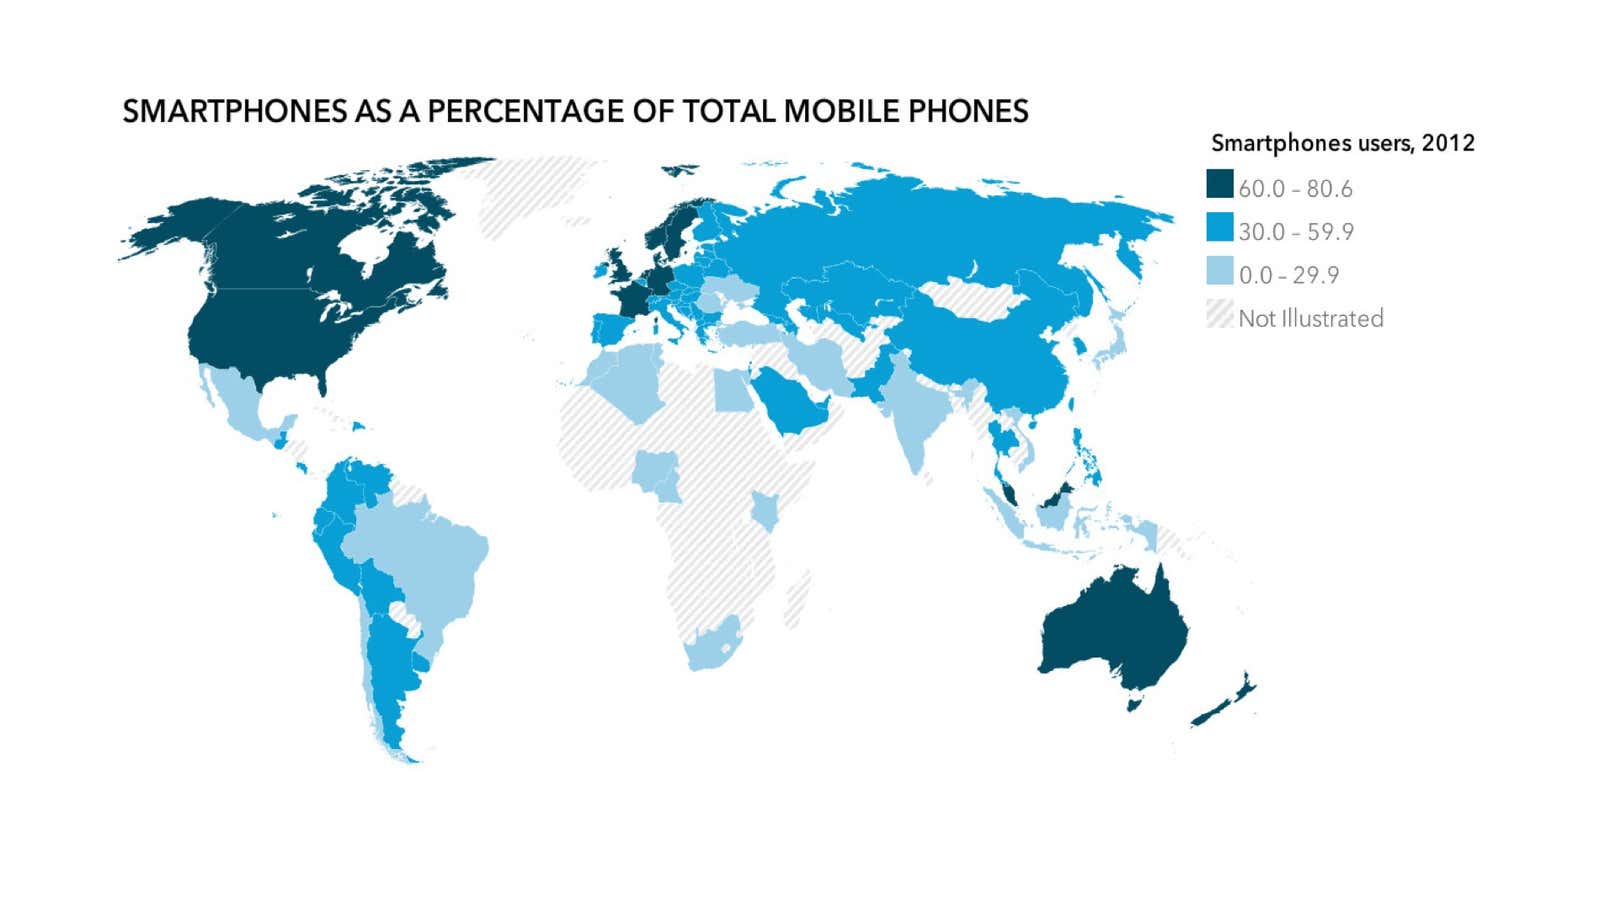 Map by Euromonitor, from the report “The Mobile Wallet”